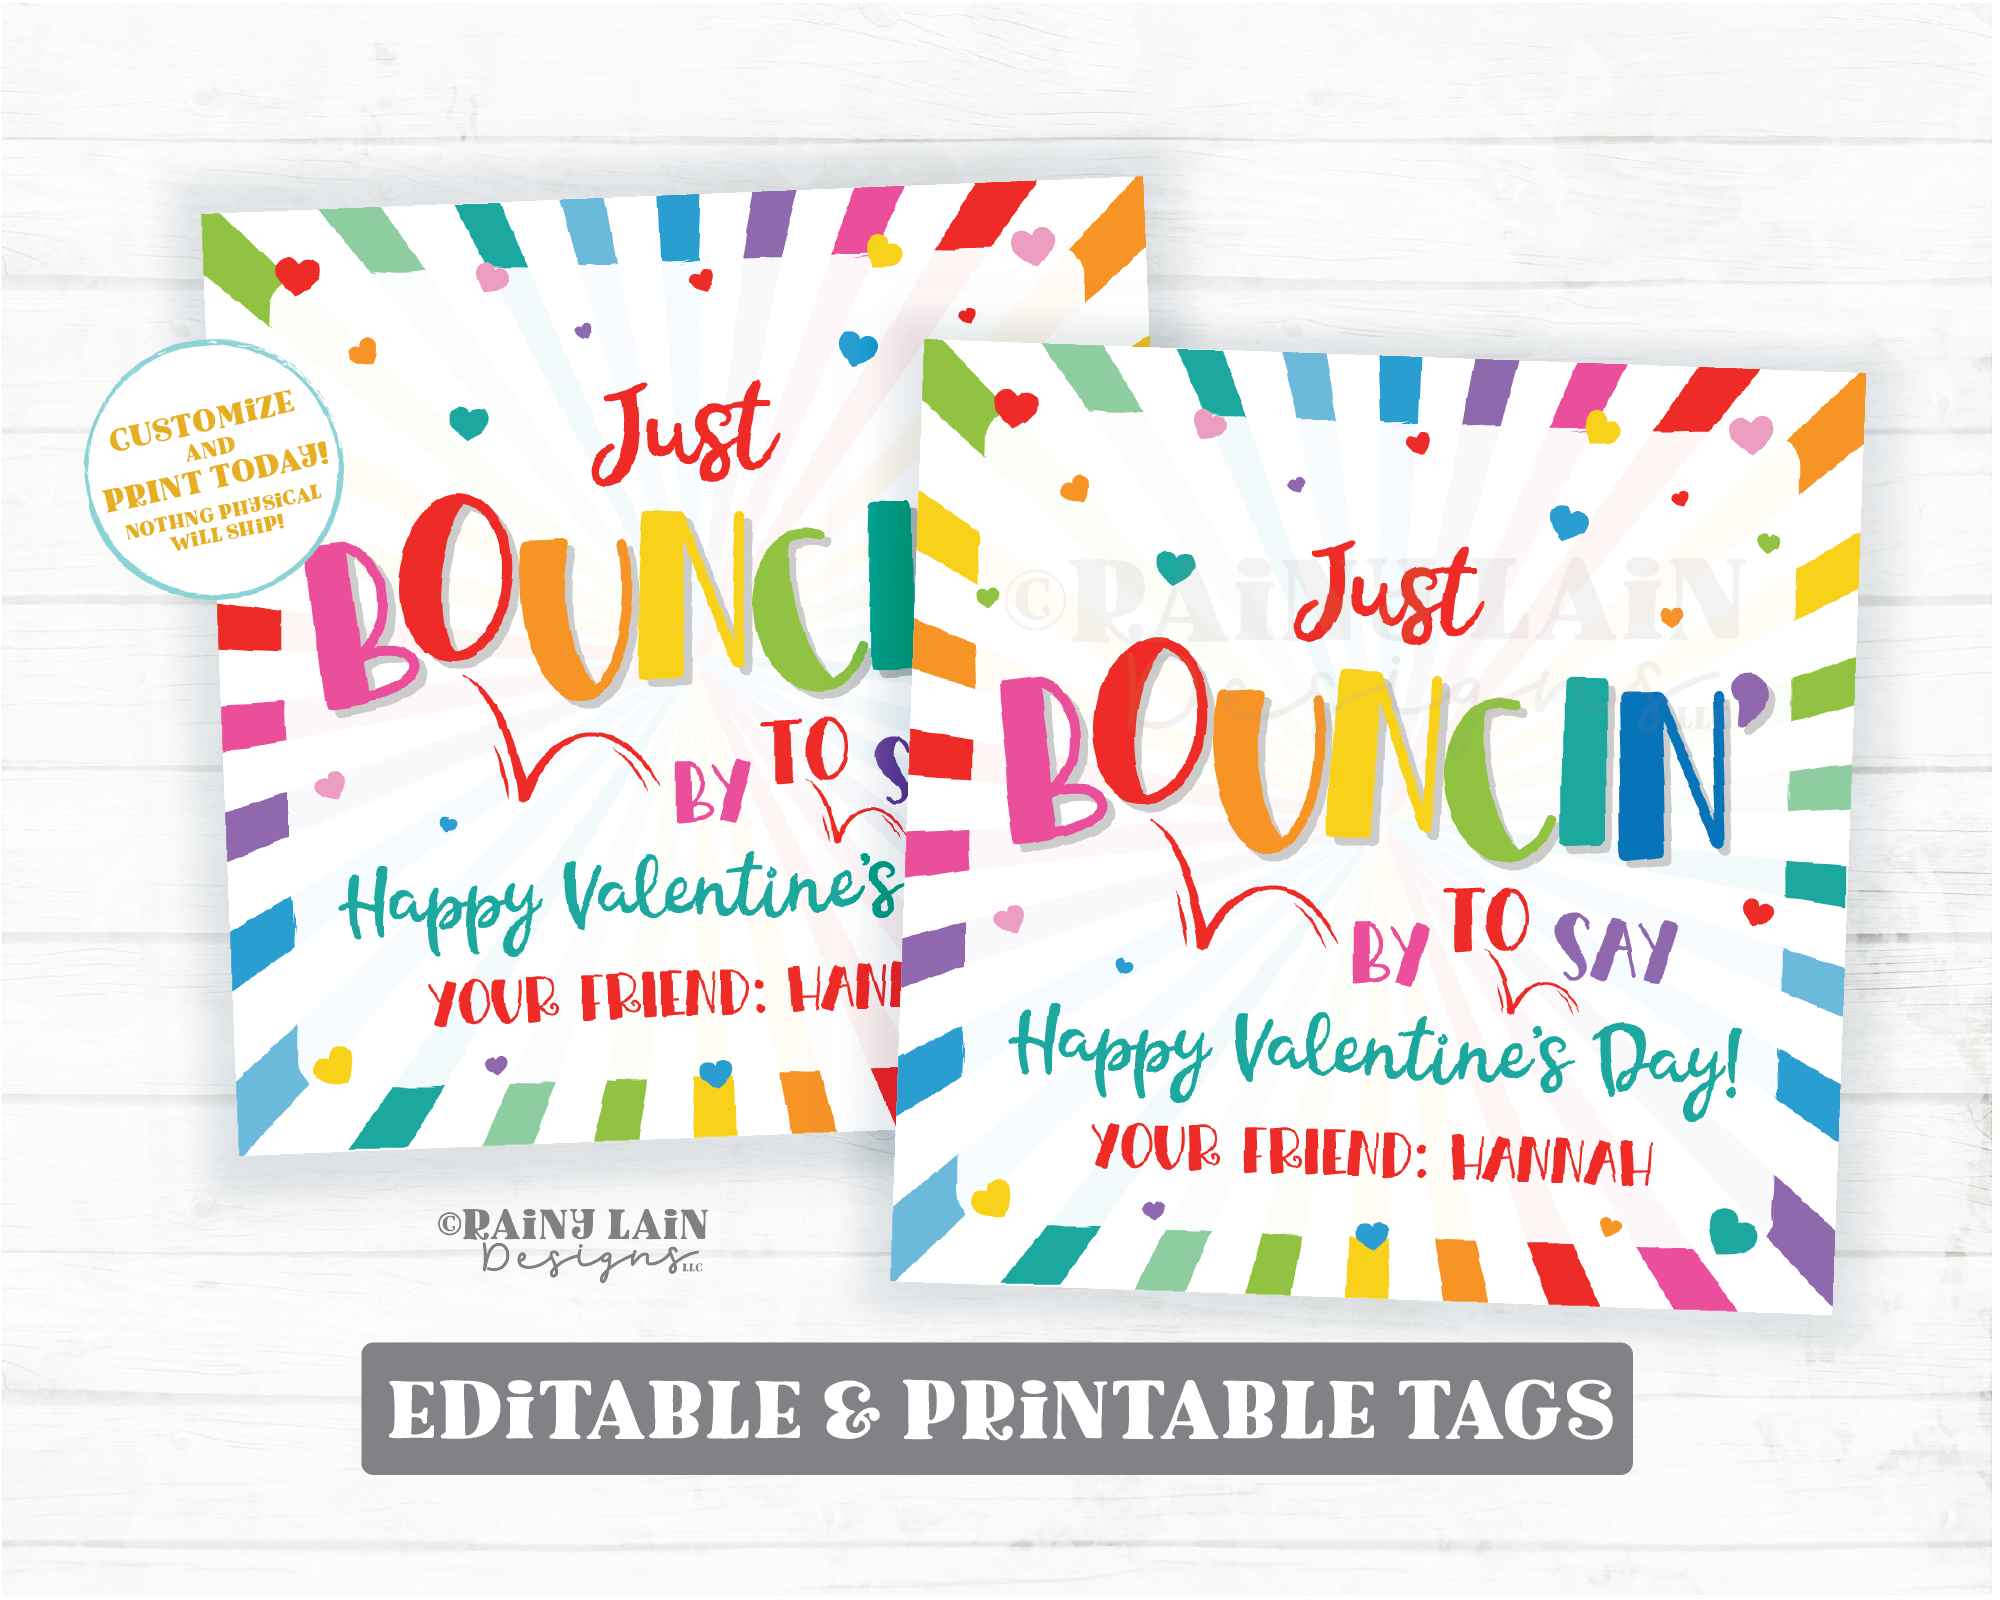 Bouncin by to say Happy Valentine's Day Tag Bouncy Ball Valentine Favor Gift Classroom Preschool Printable Non-Candy From Teacher Student